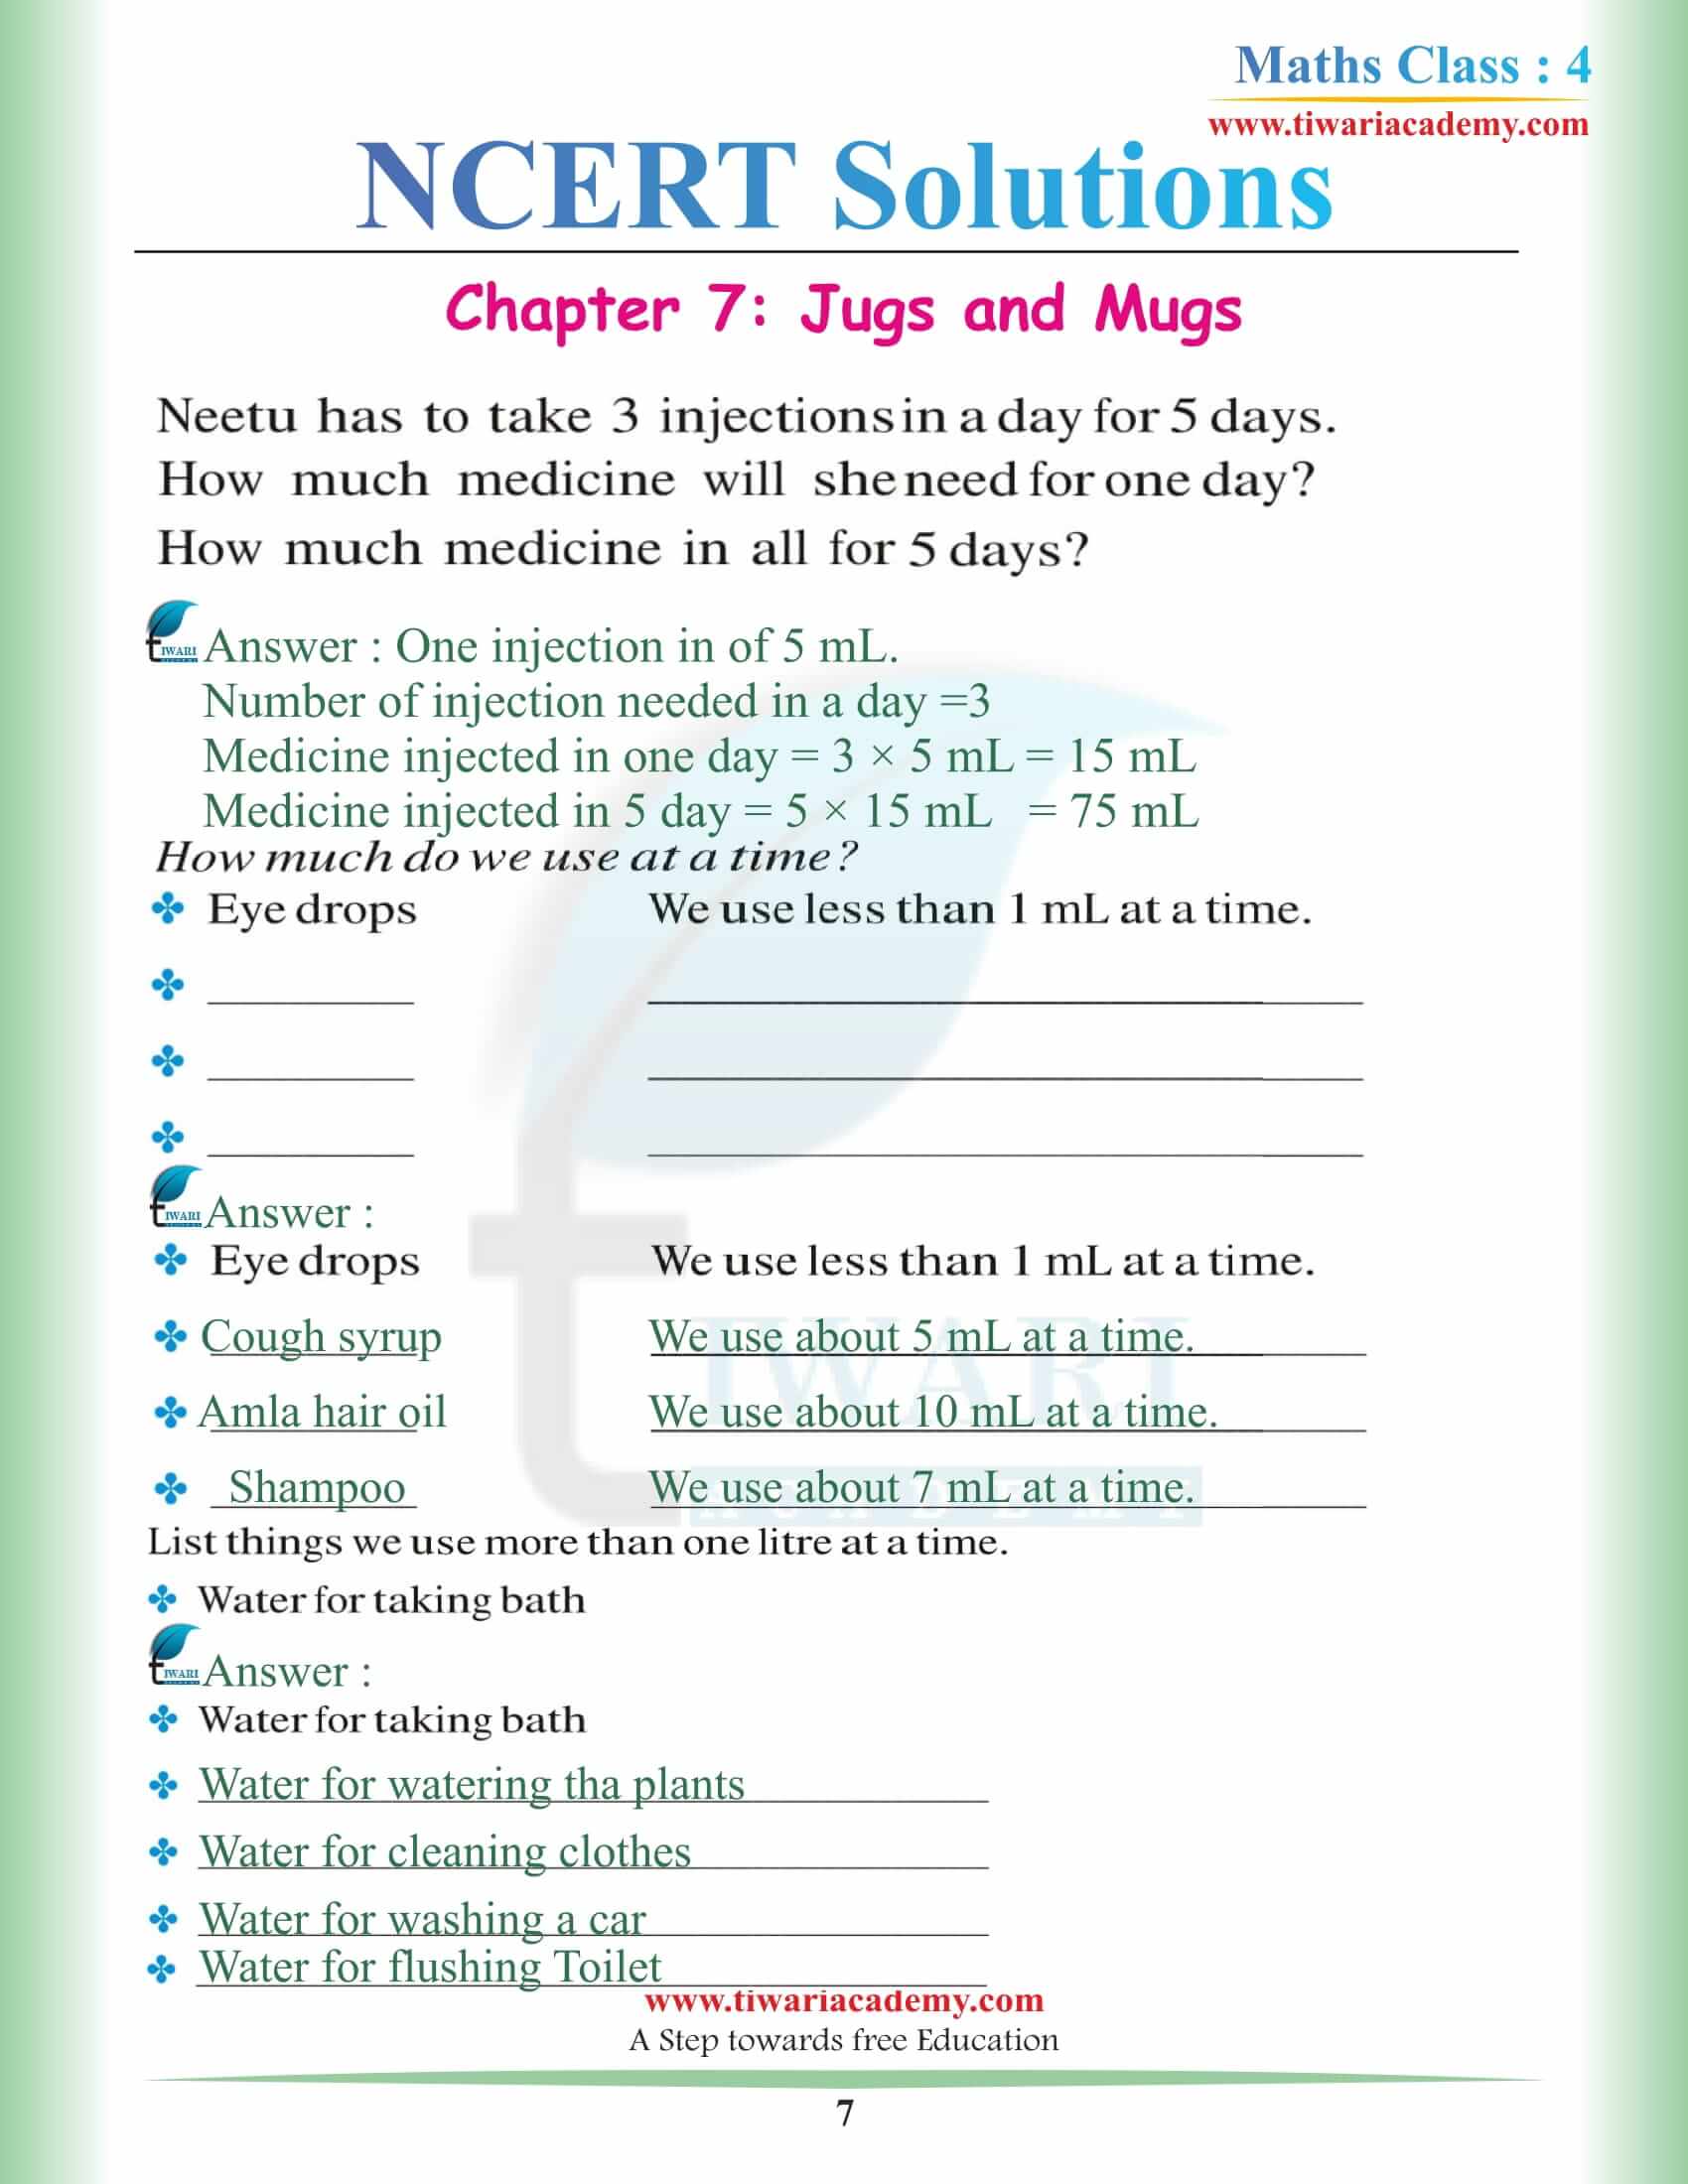 Class 4 Maths NCERT Chapter 7 Solutions in English